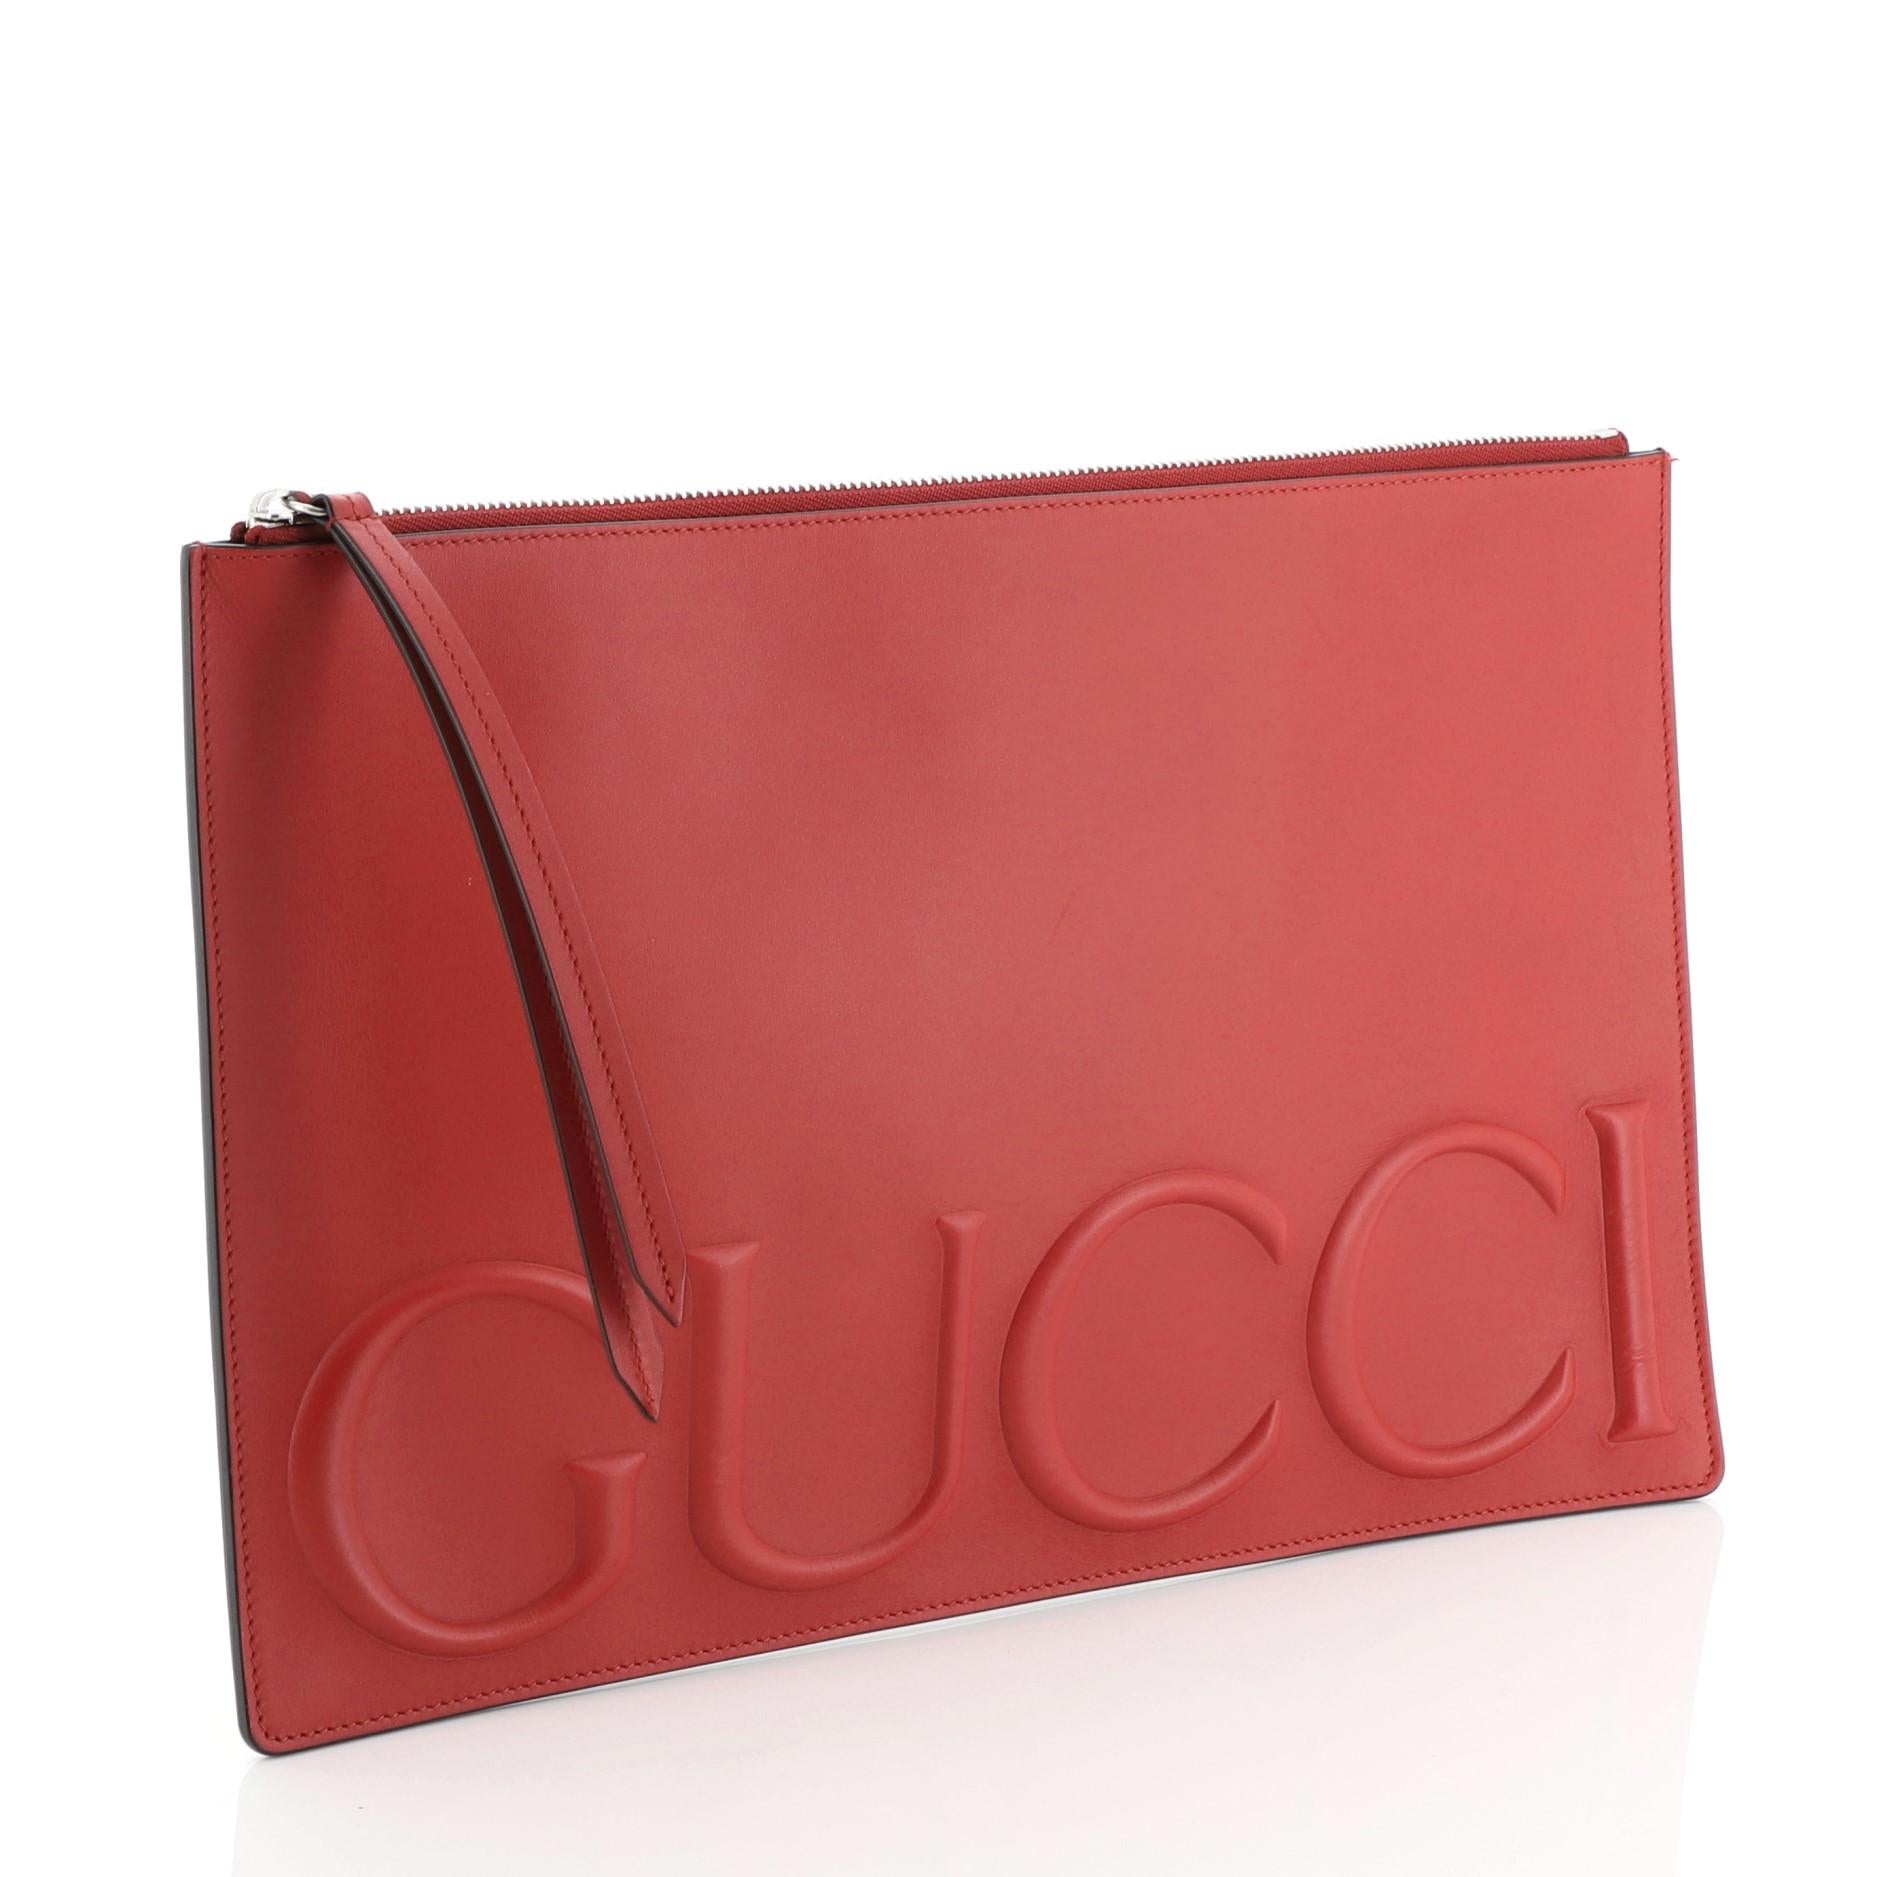 This Gucci XL Zip Clutch Leather is an evening piece perfect for a night out on the town. Crafted from red leather, it features an embossed Gucci logo on front and silver-tone hardware. Its zip closure opens to a black fabric interior. 

Estimated